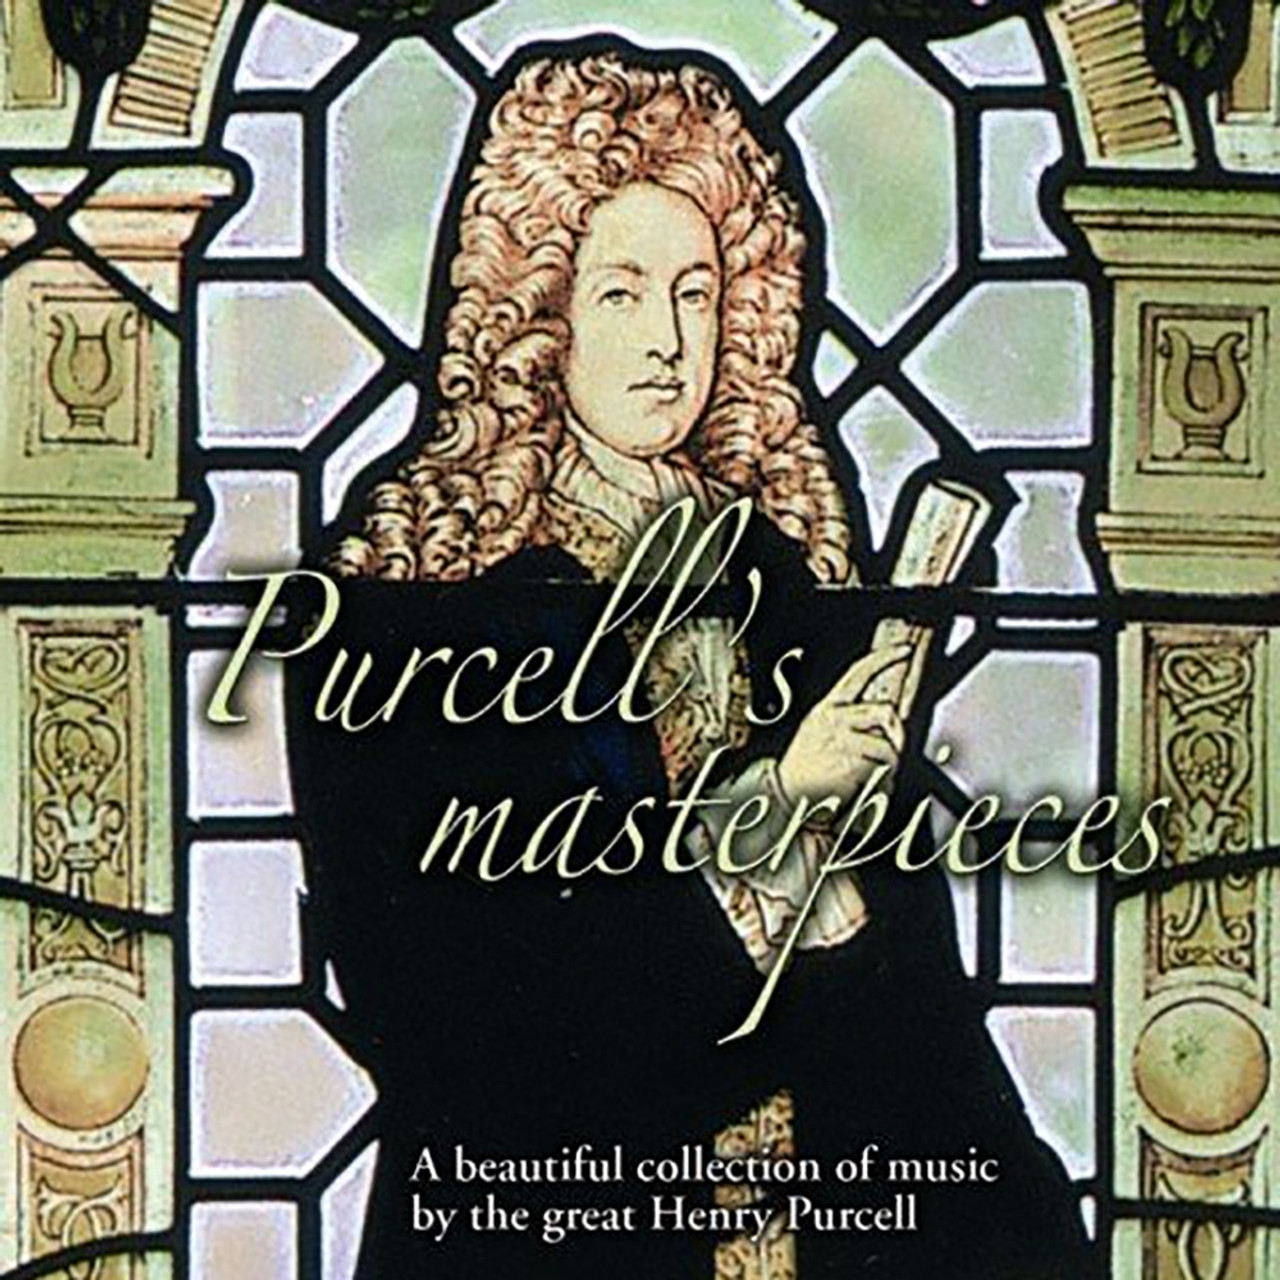 CD　Shop　Purcell's　Abbey　Masterpieces　Westminster